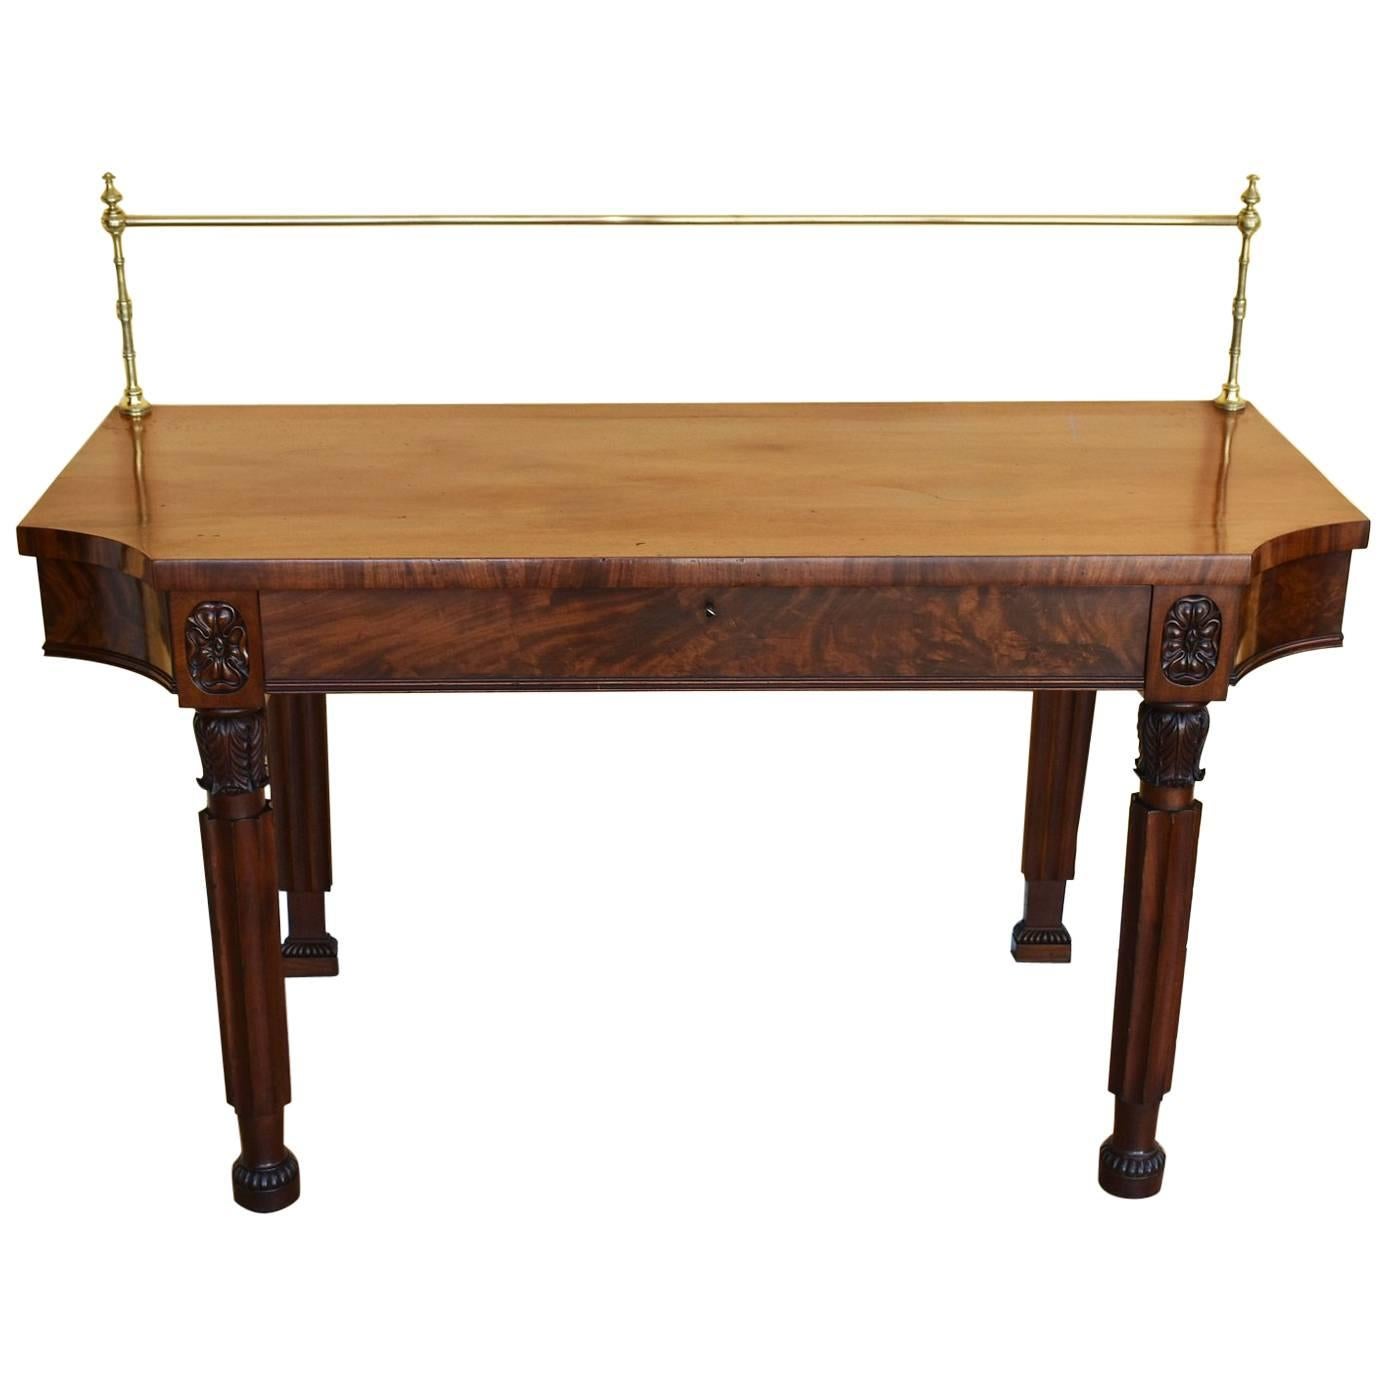 19th Century Regency Mahogany Serving Table/Sideboard For Sale